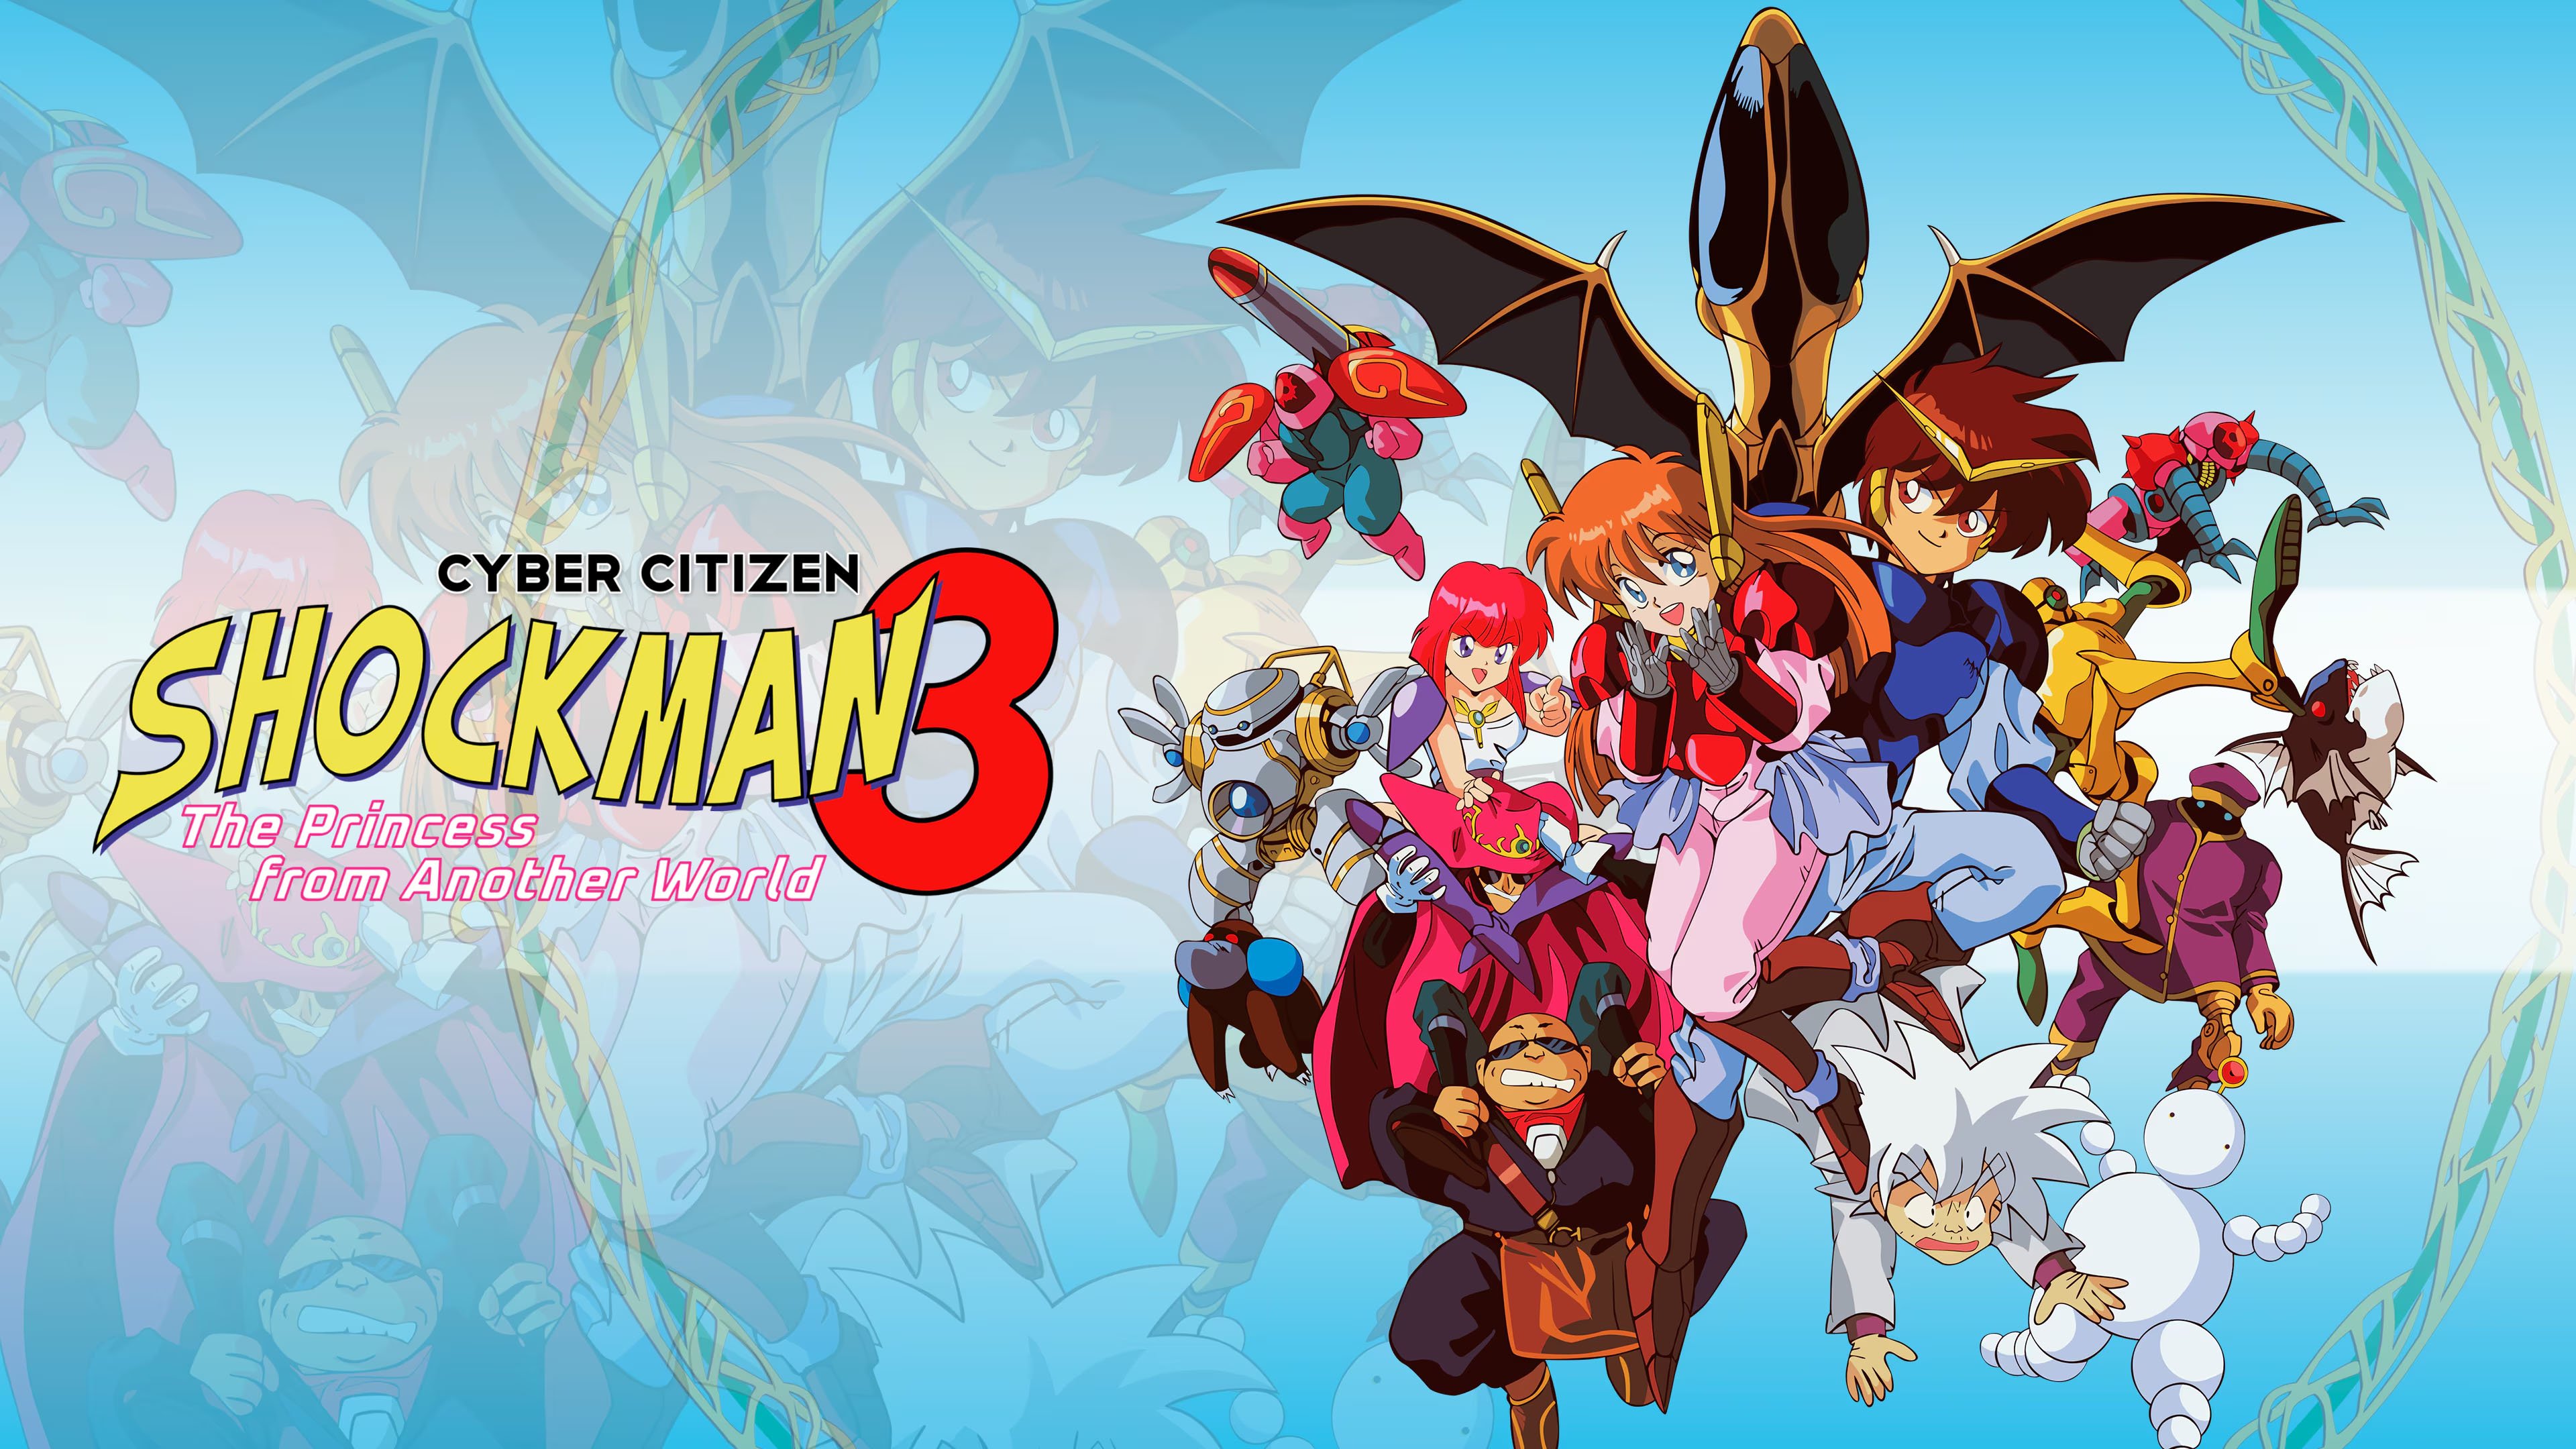 Cyber ​​Citizen Shockman 3: The Princess from Another World komt op 3 mei naar PS5, Xbox Series, PS4, Xbox One en Switch